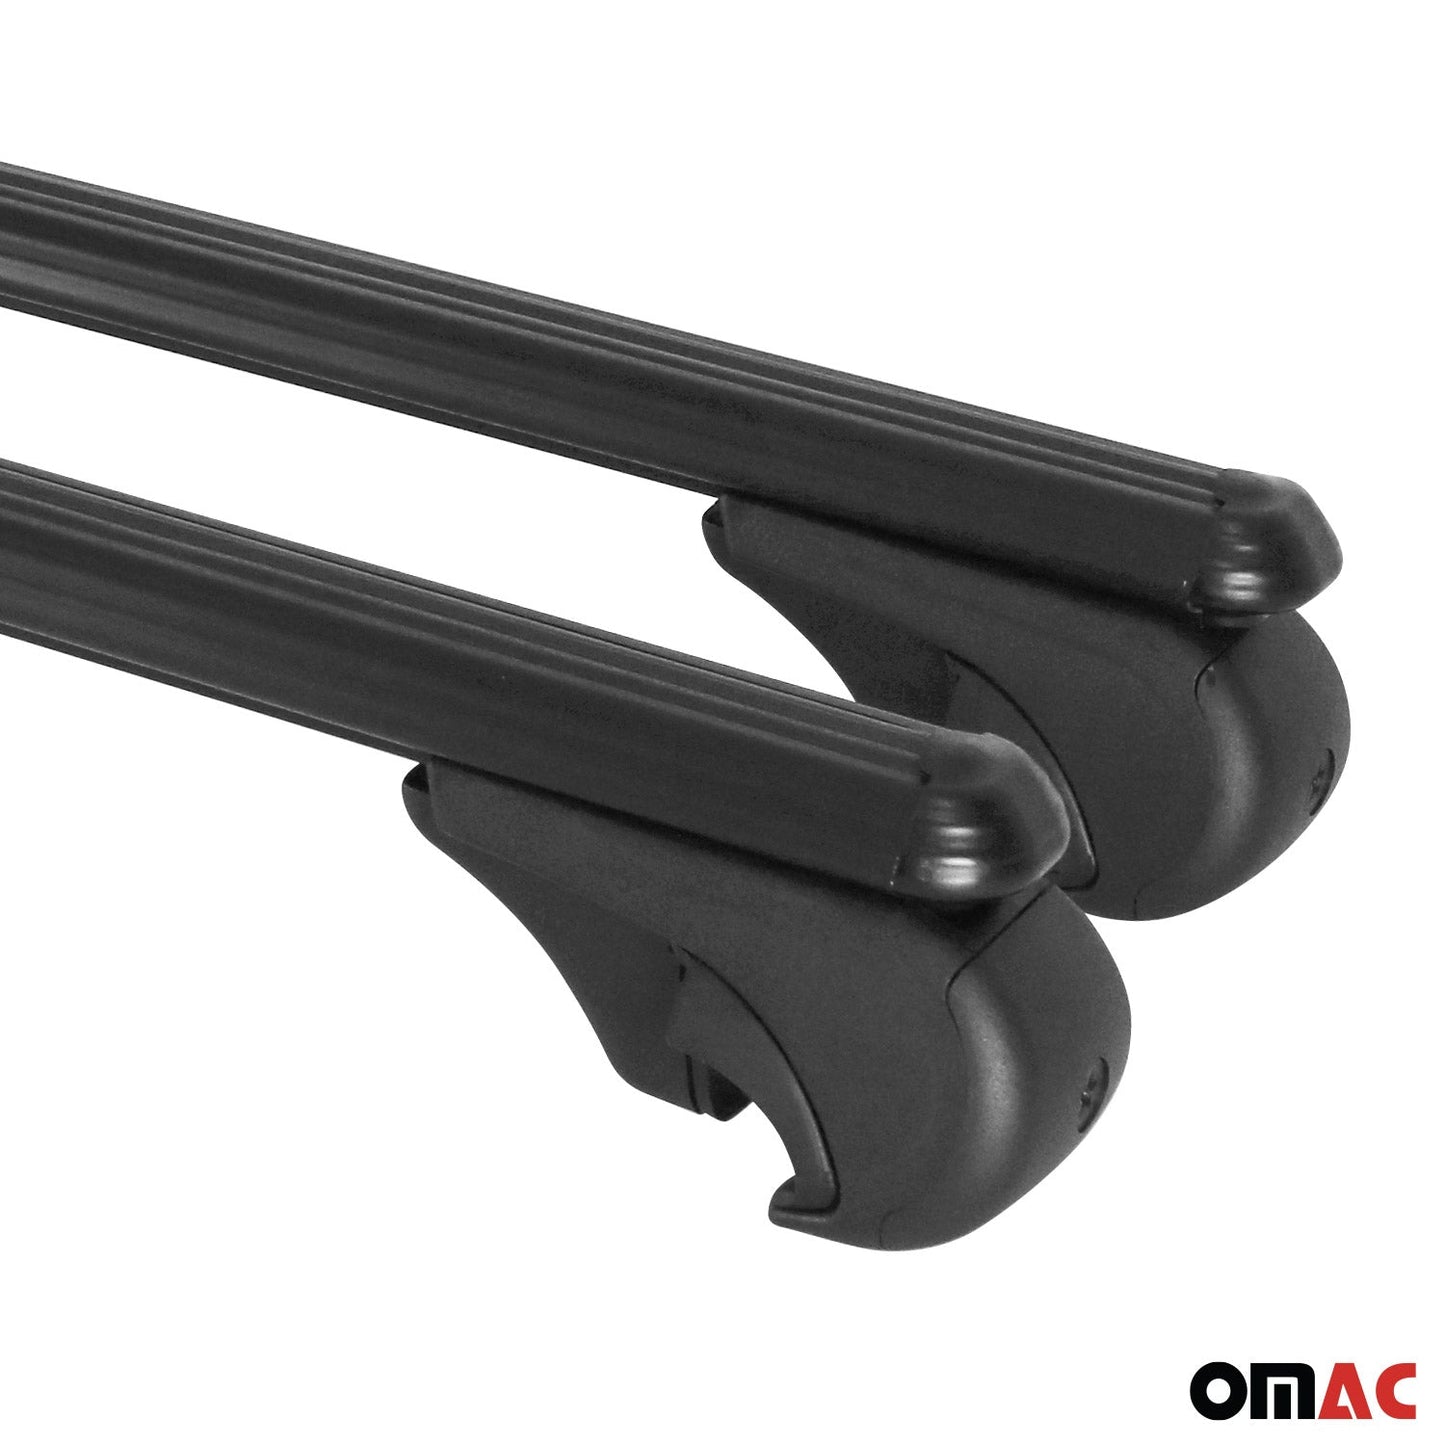 OMAC Roof Rack Cross Bars Luggage Carrier Black Set for BMW X3 2003-2010 12079696929LB